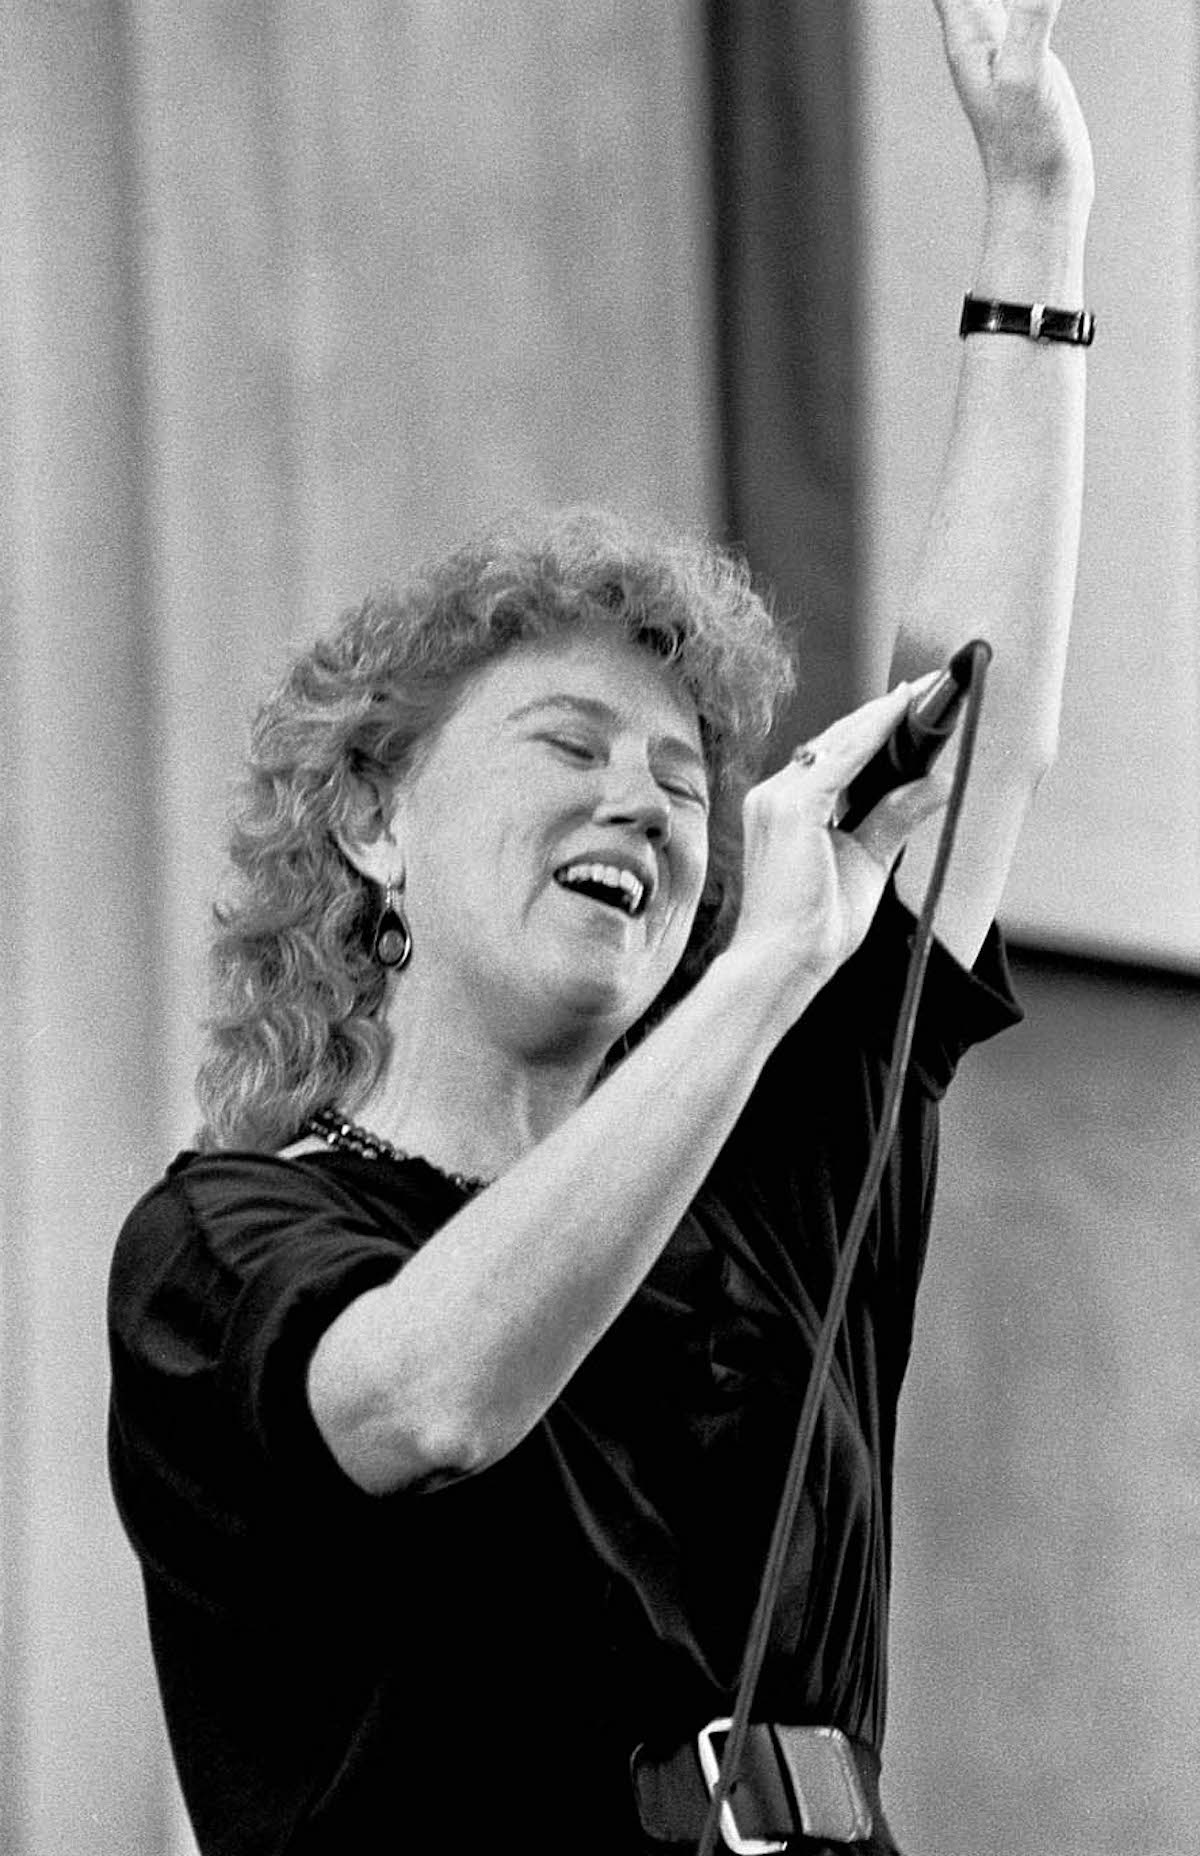 Holly performing at the Redwood Music Festival at Greek Theatre, Berkeley, CA, 1986. Photo Credit: J.A. Rubino. Photo courtesy of Holly Near.